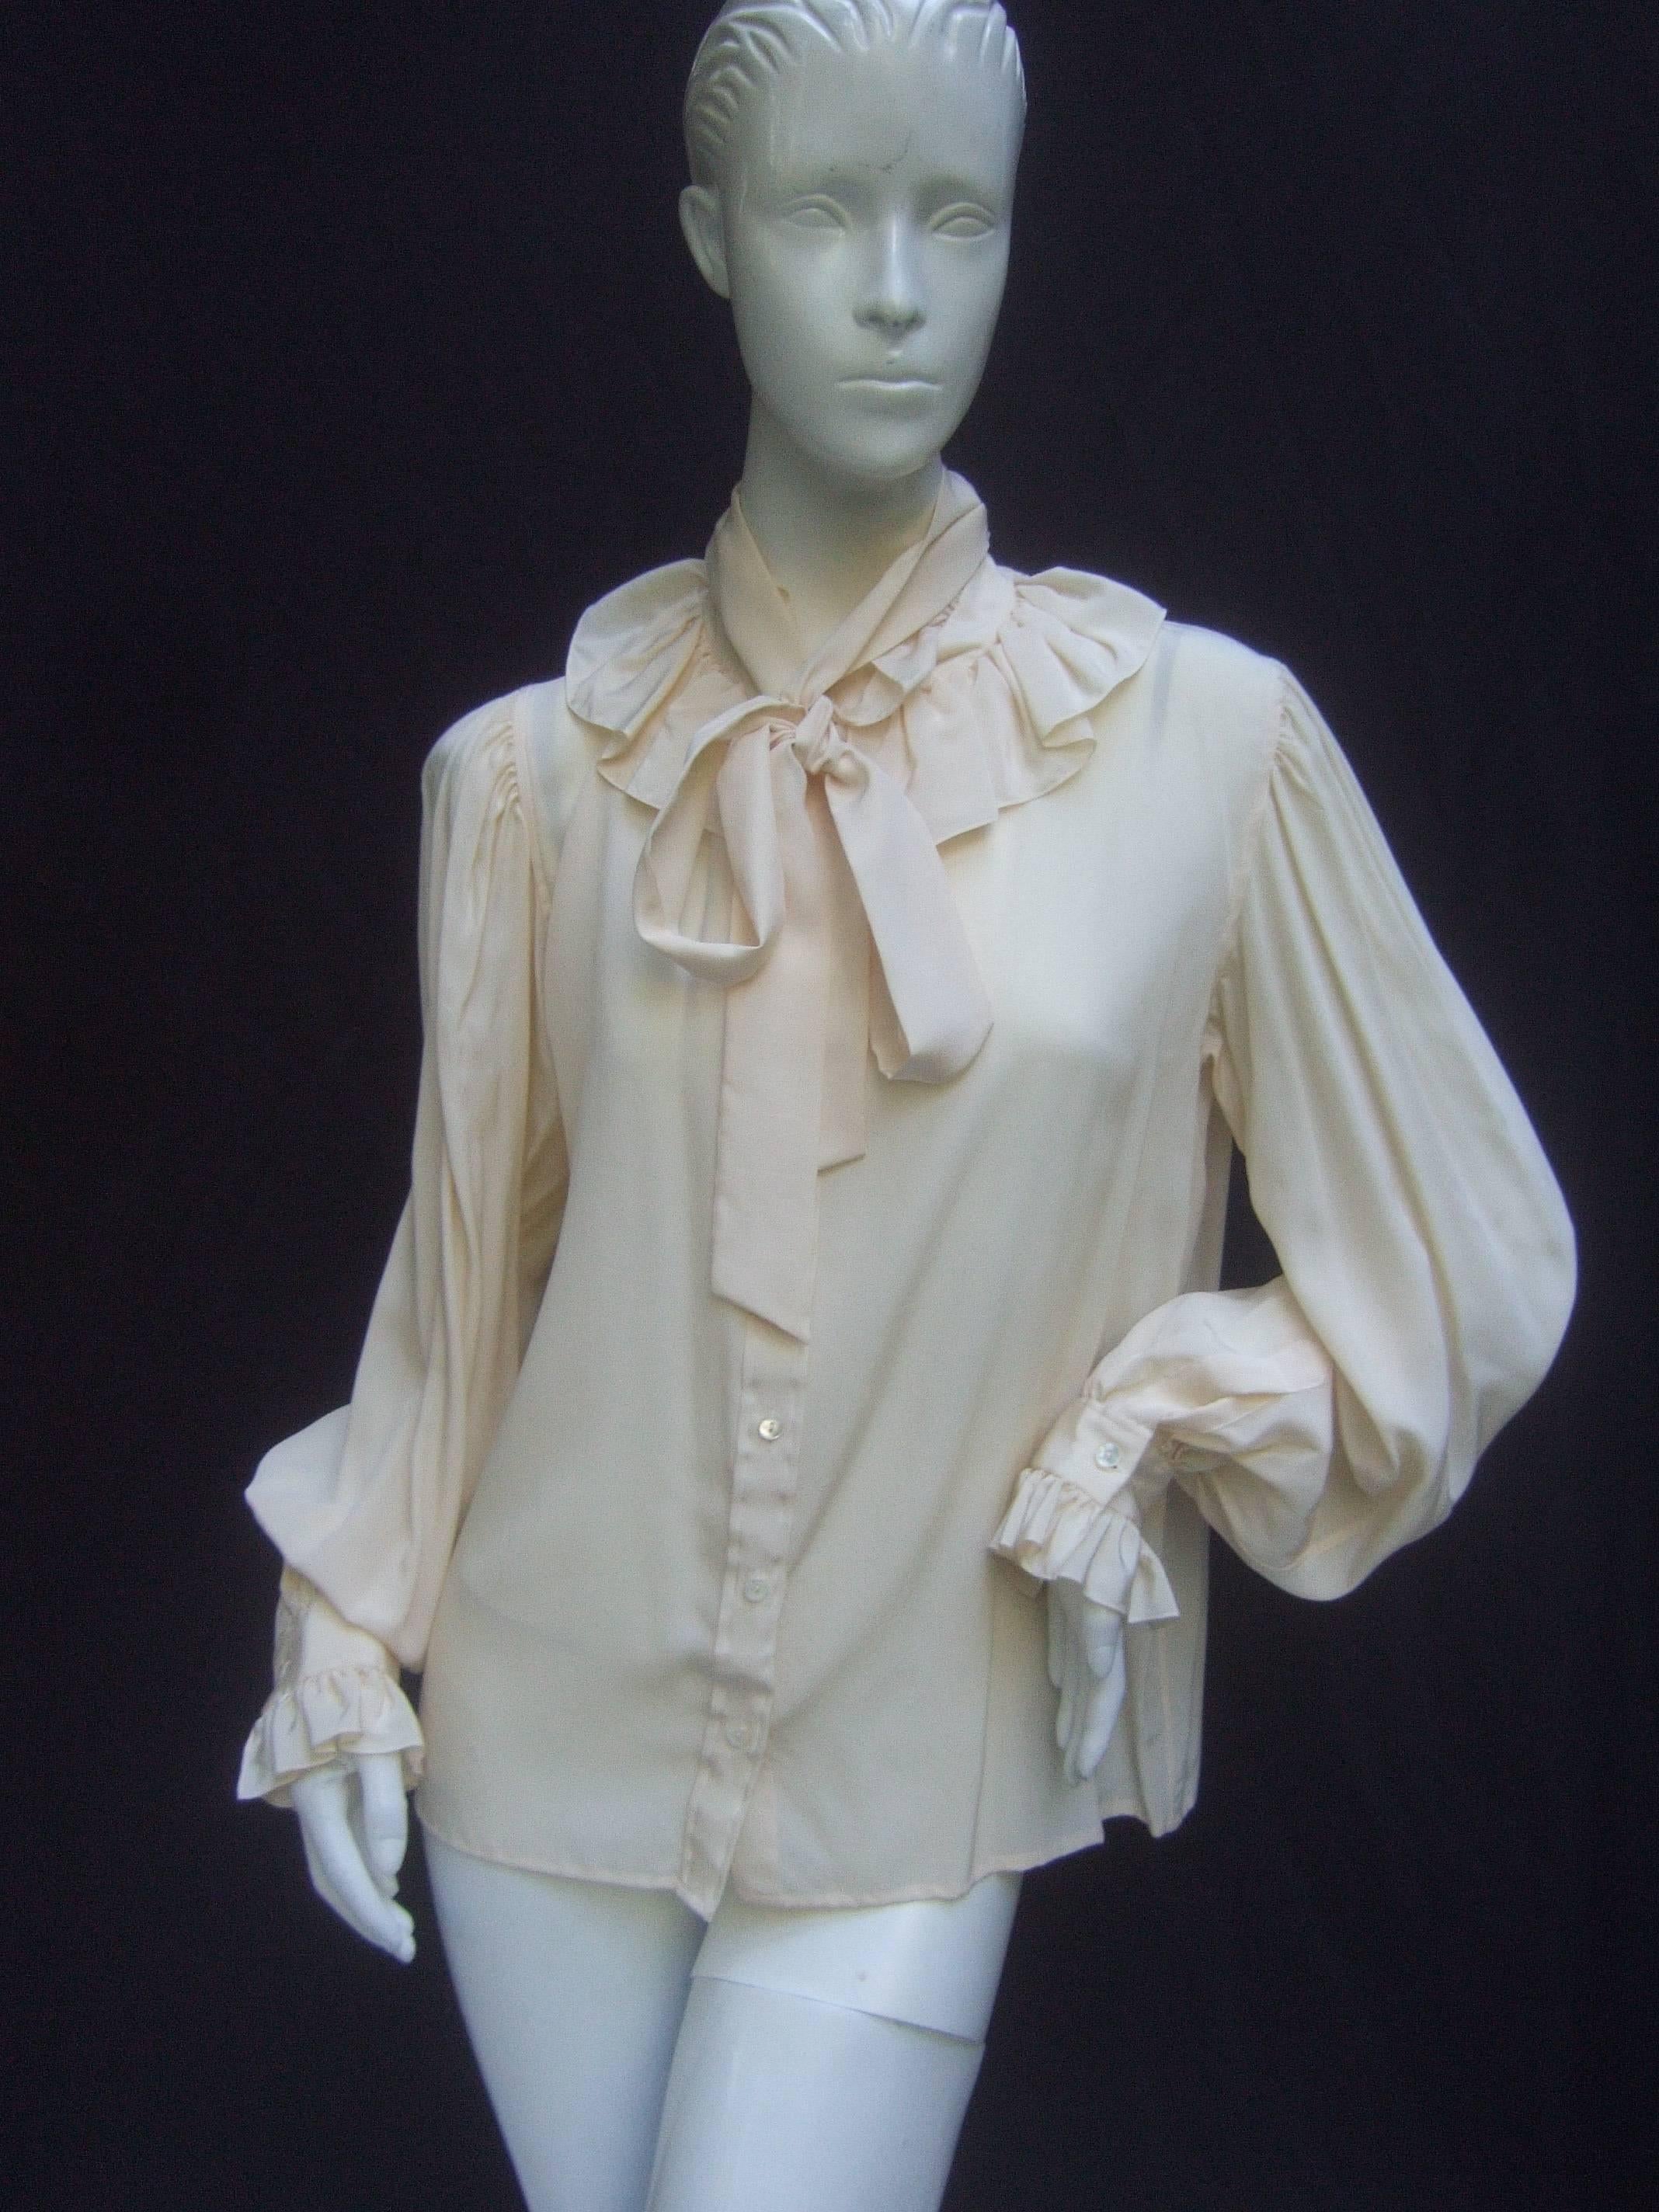 Yves Saint Laurent Rive Gauche Ivory silk ruffled blouse
The classic silk blouse is designed with a ruffled collar
neckline and matching ruffled cuffs

The versatile design has a stationary bow tie that
can be knotted in a billowy bow at the